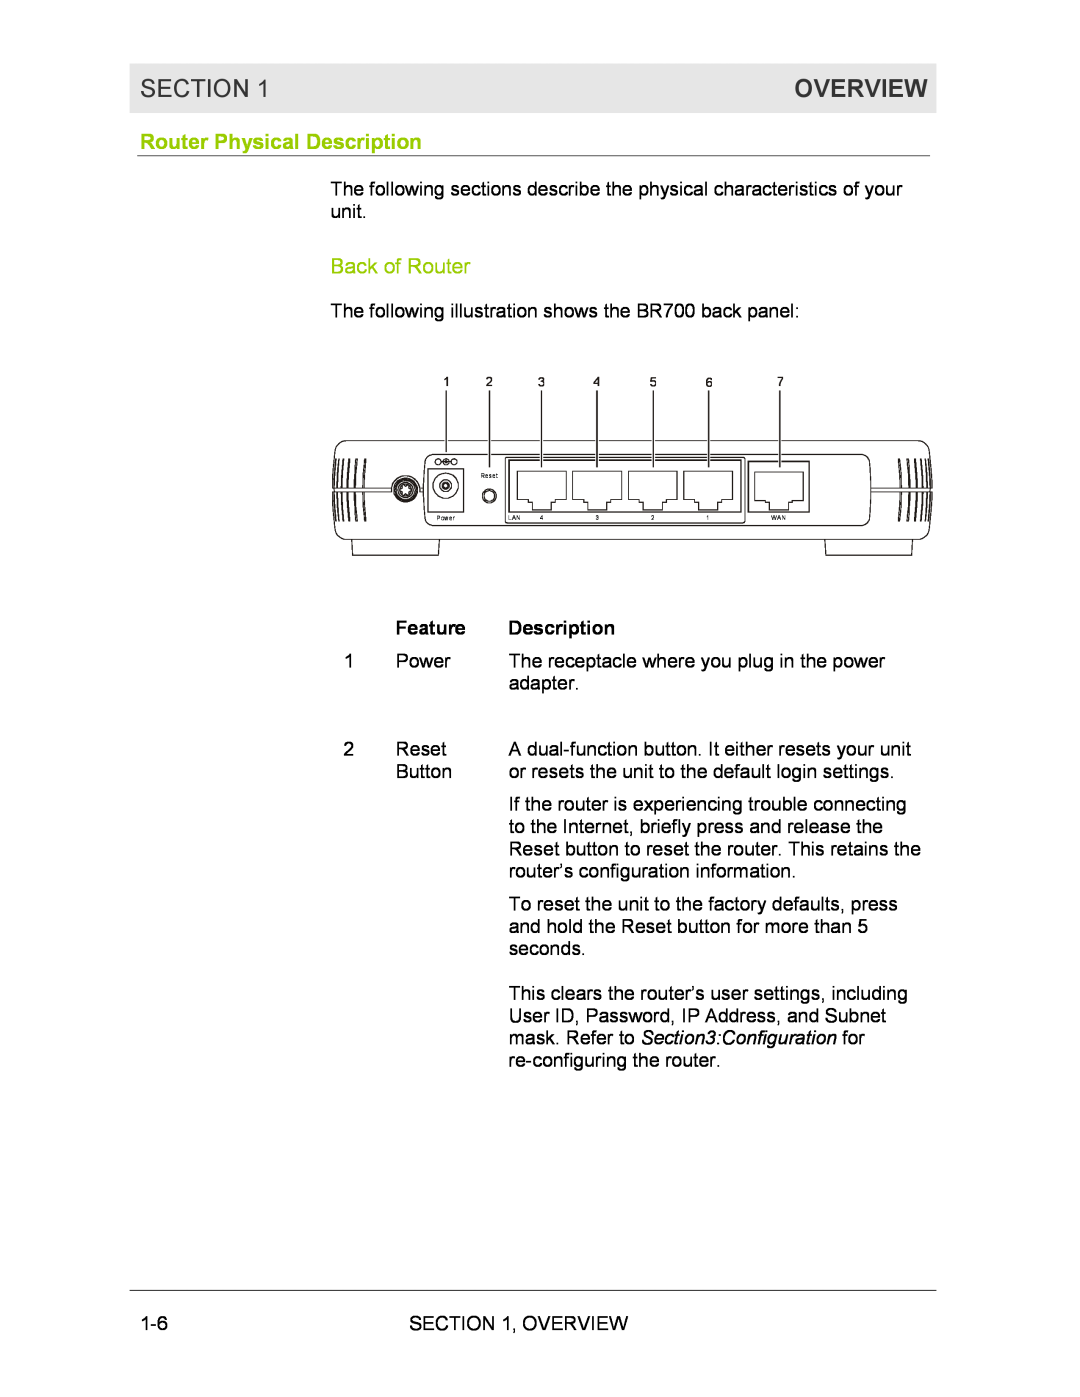 Motorola BR700 manual Router Physical Description, Back of Router, Feature, Section, Overview 